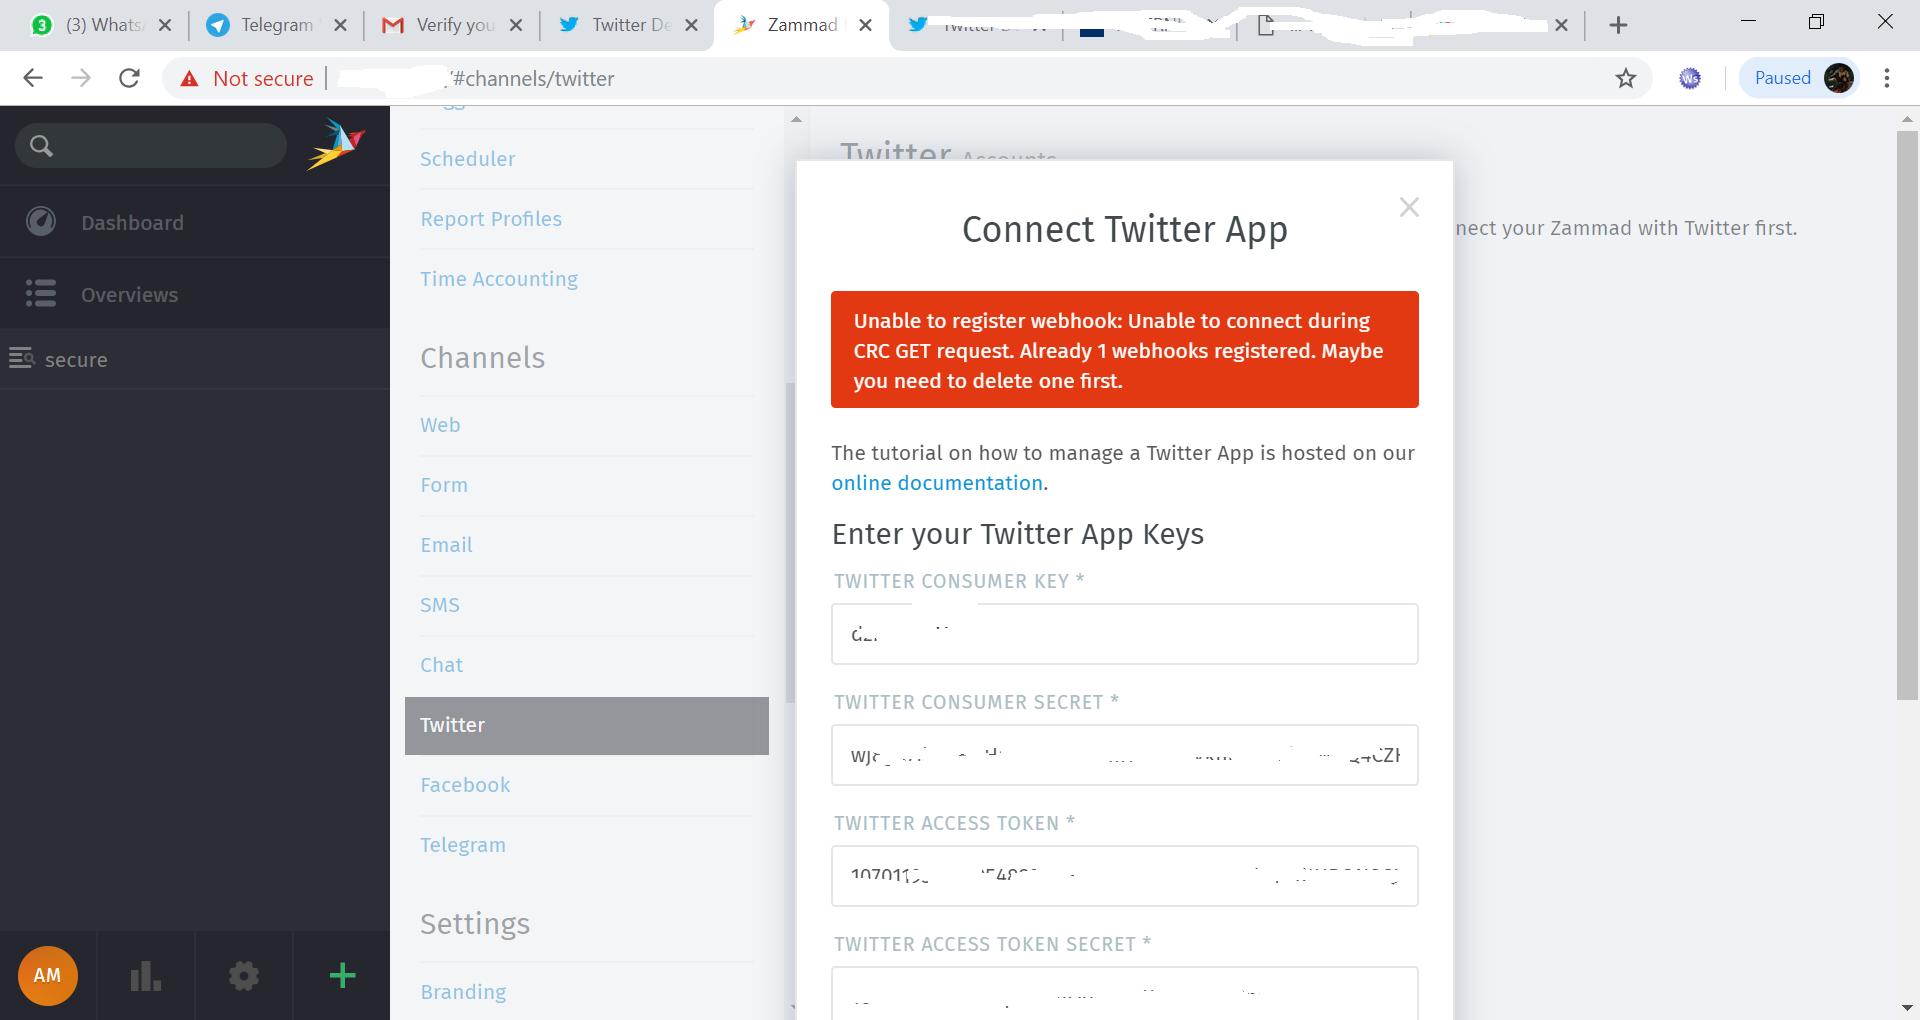 "Unable to register webhook" when connect to twitter.